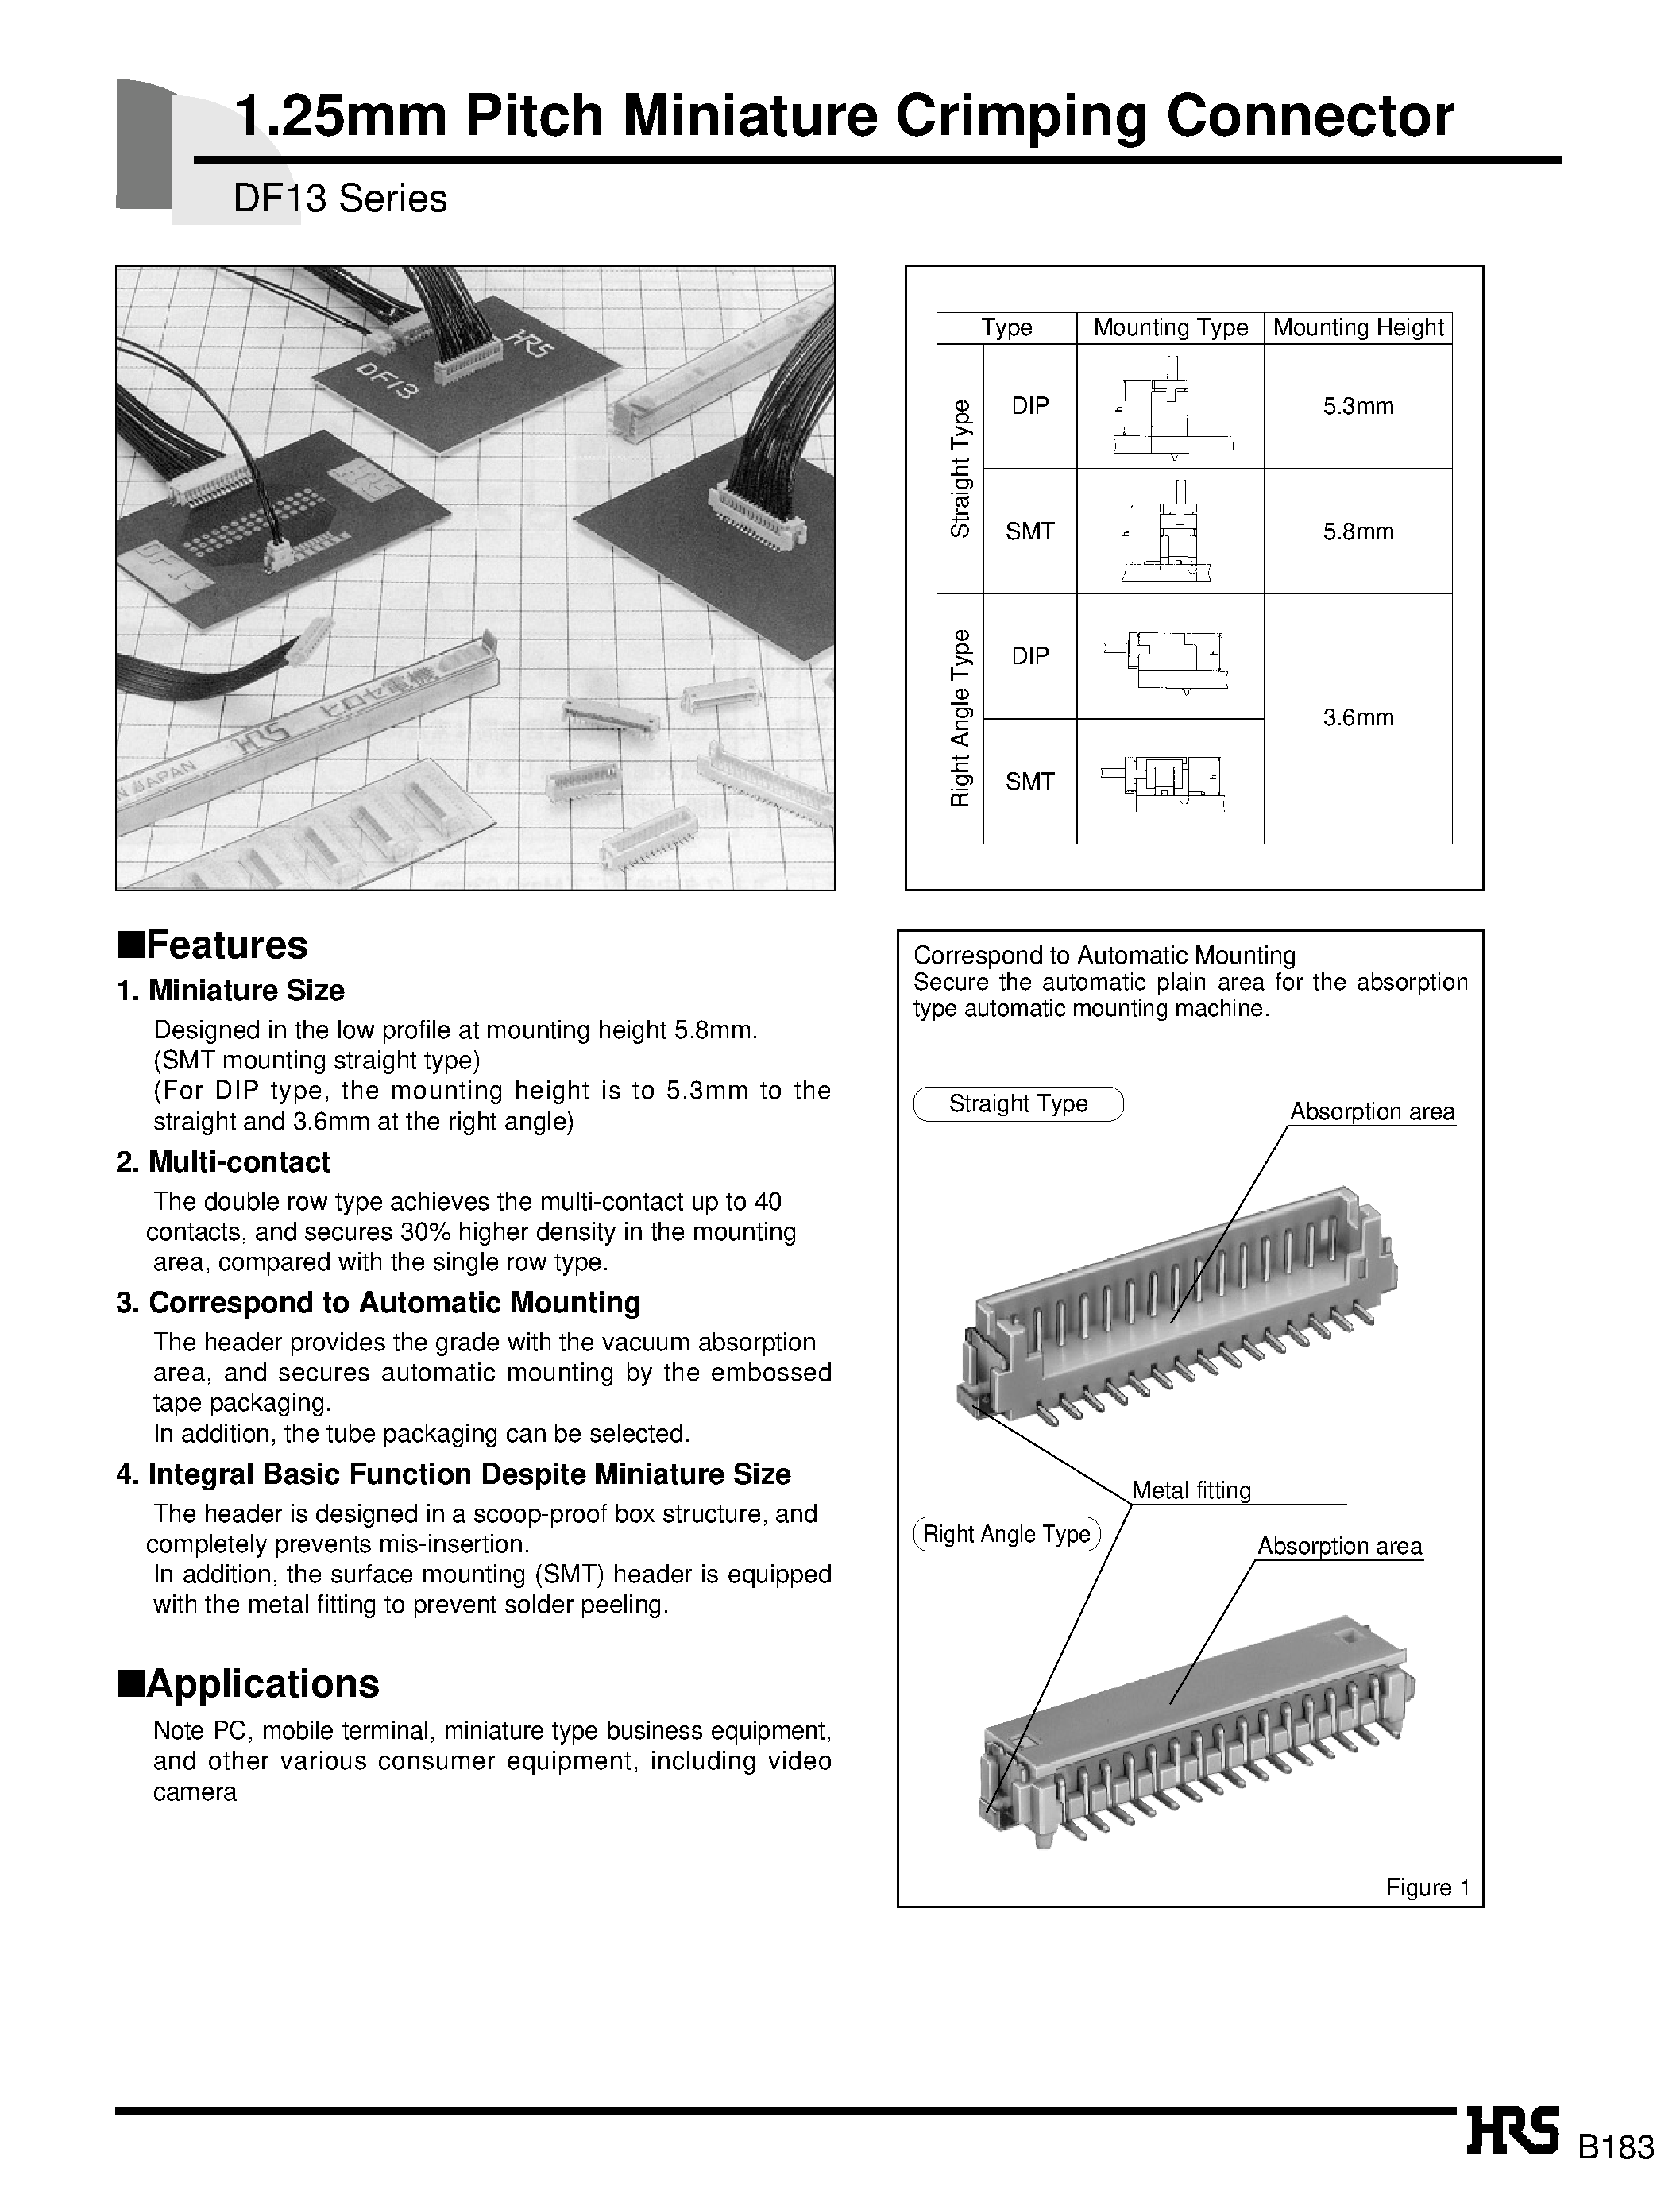 Datasheet DF13-10S-1.25C - 1.25mm Pitch Miniature Crimping Connector page 1